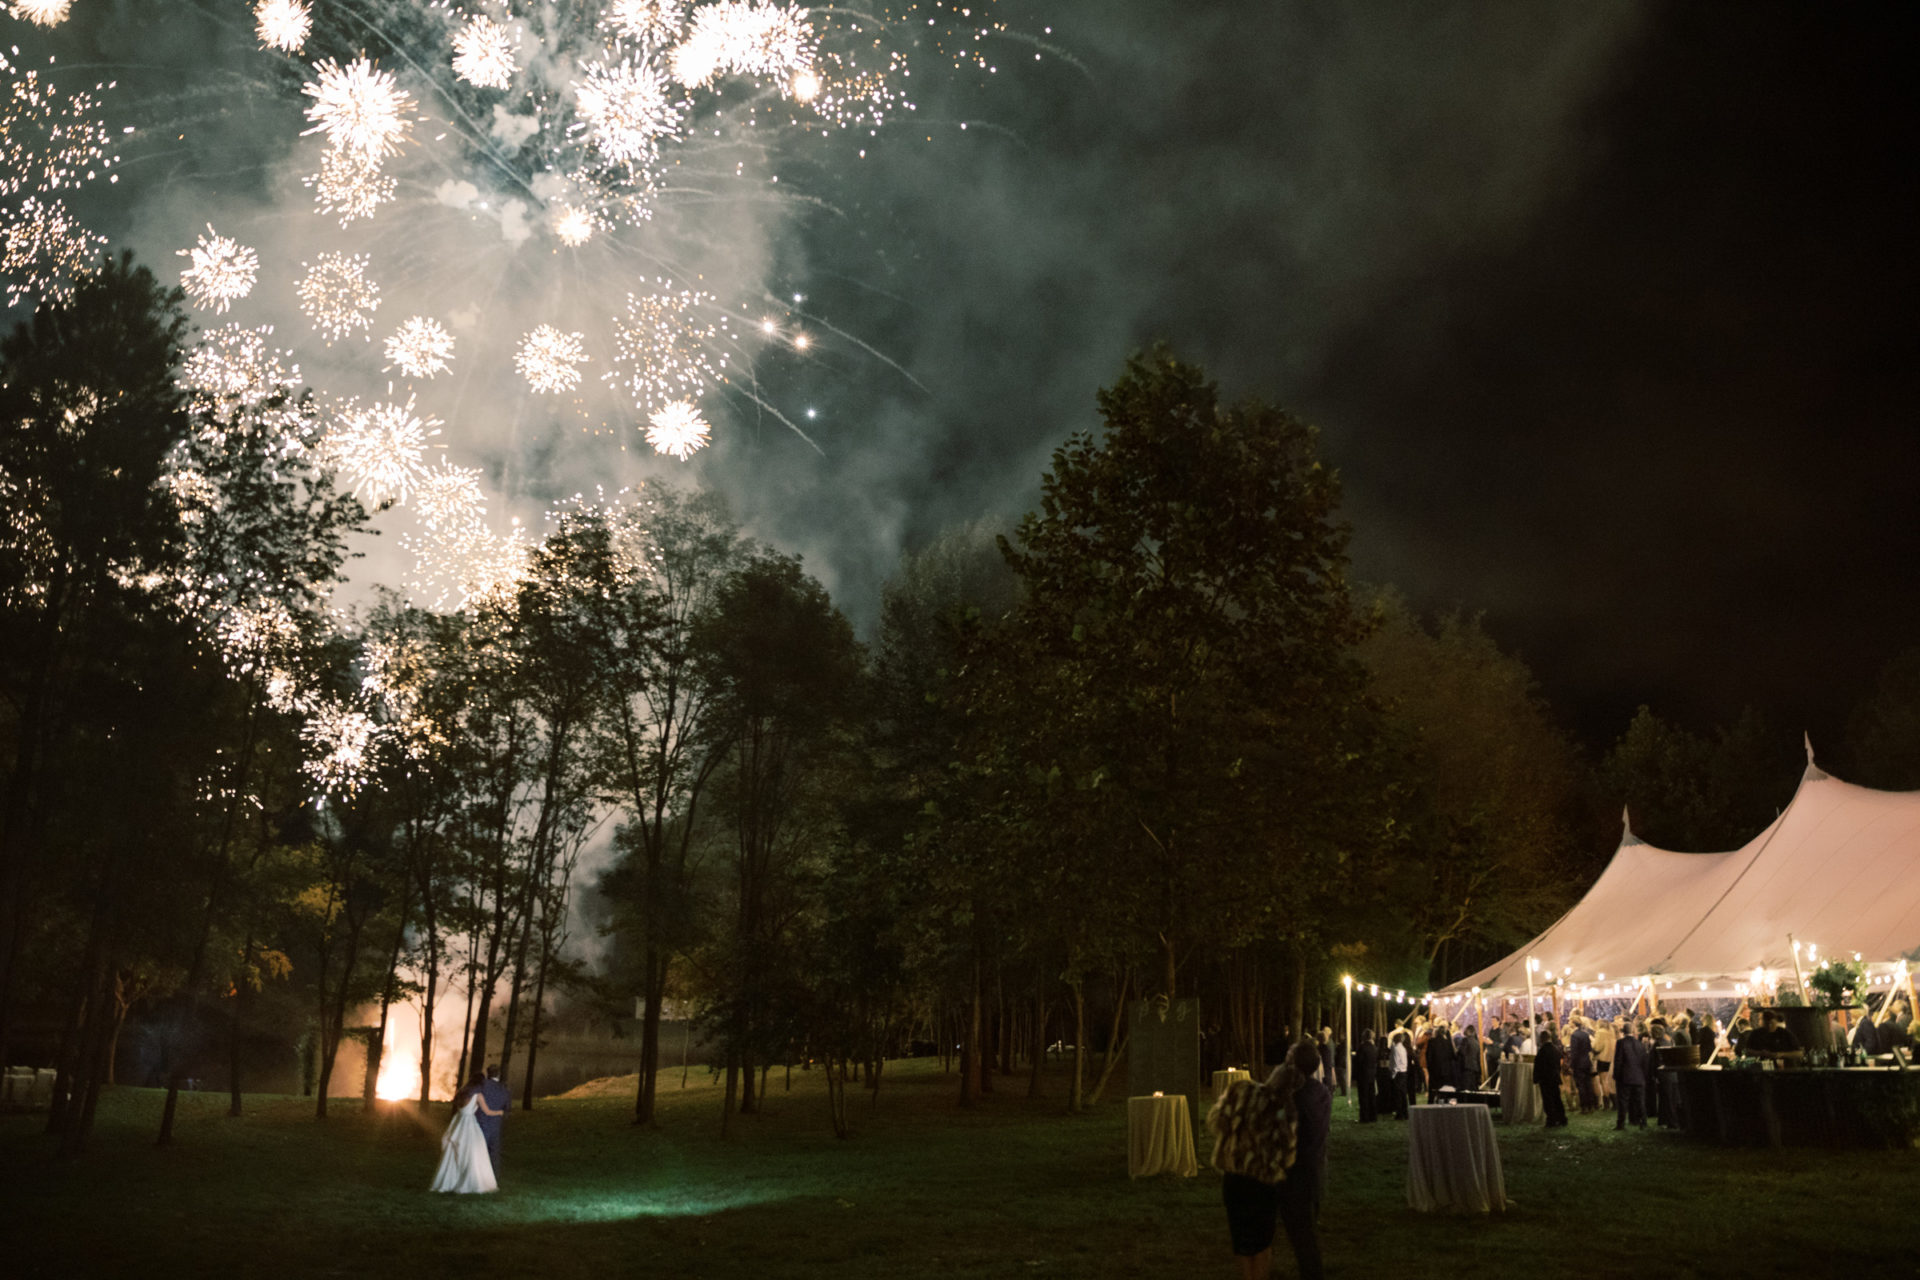 Large white tent for wedding reception and fireworks in the sky